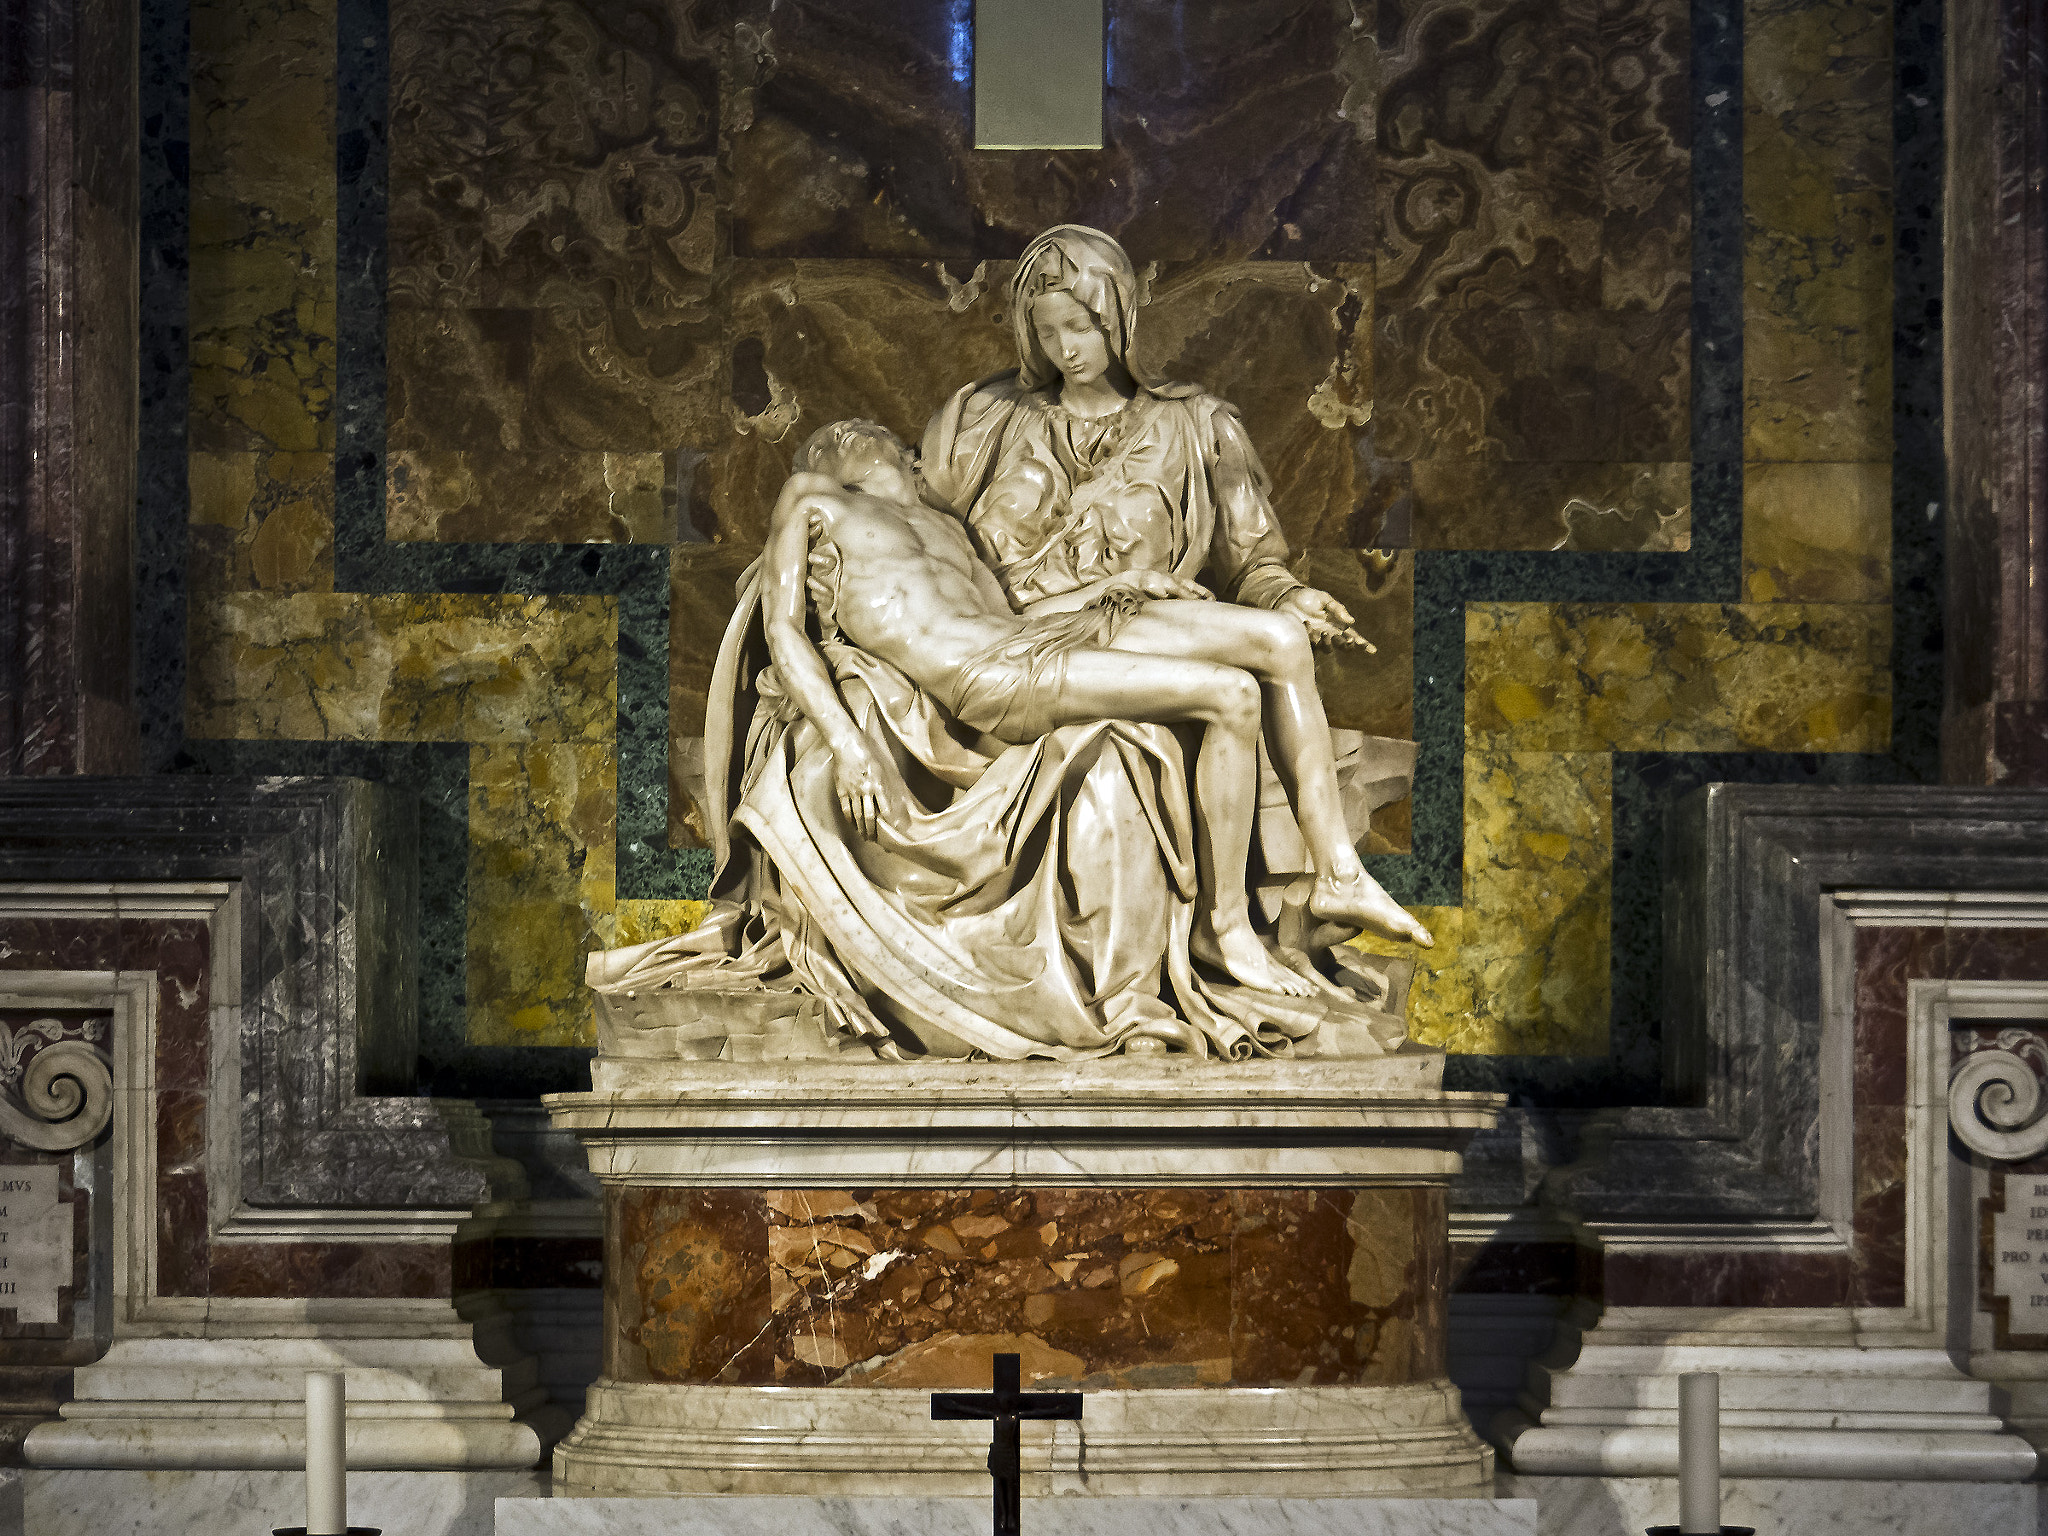 Olympus OM-D E-M10 II sample photo. The pietà by michelangelo buonarroti in st. peter's basilica, roma photography